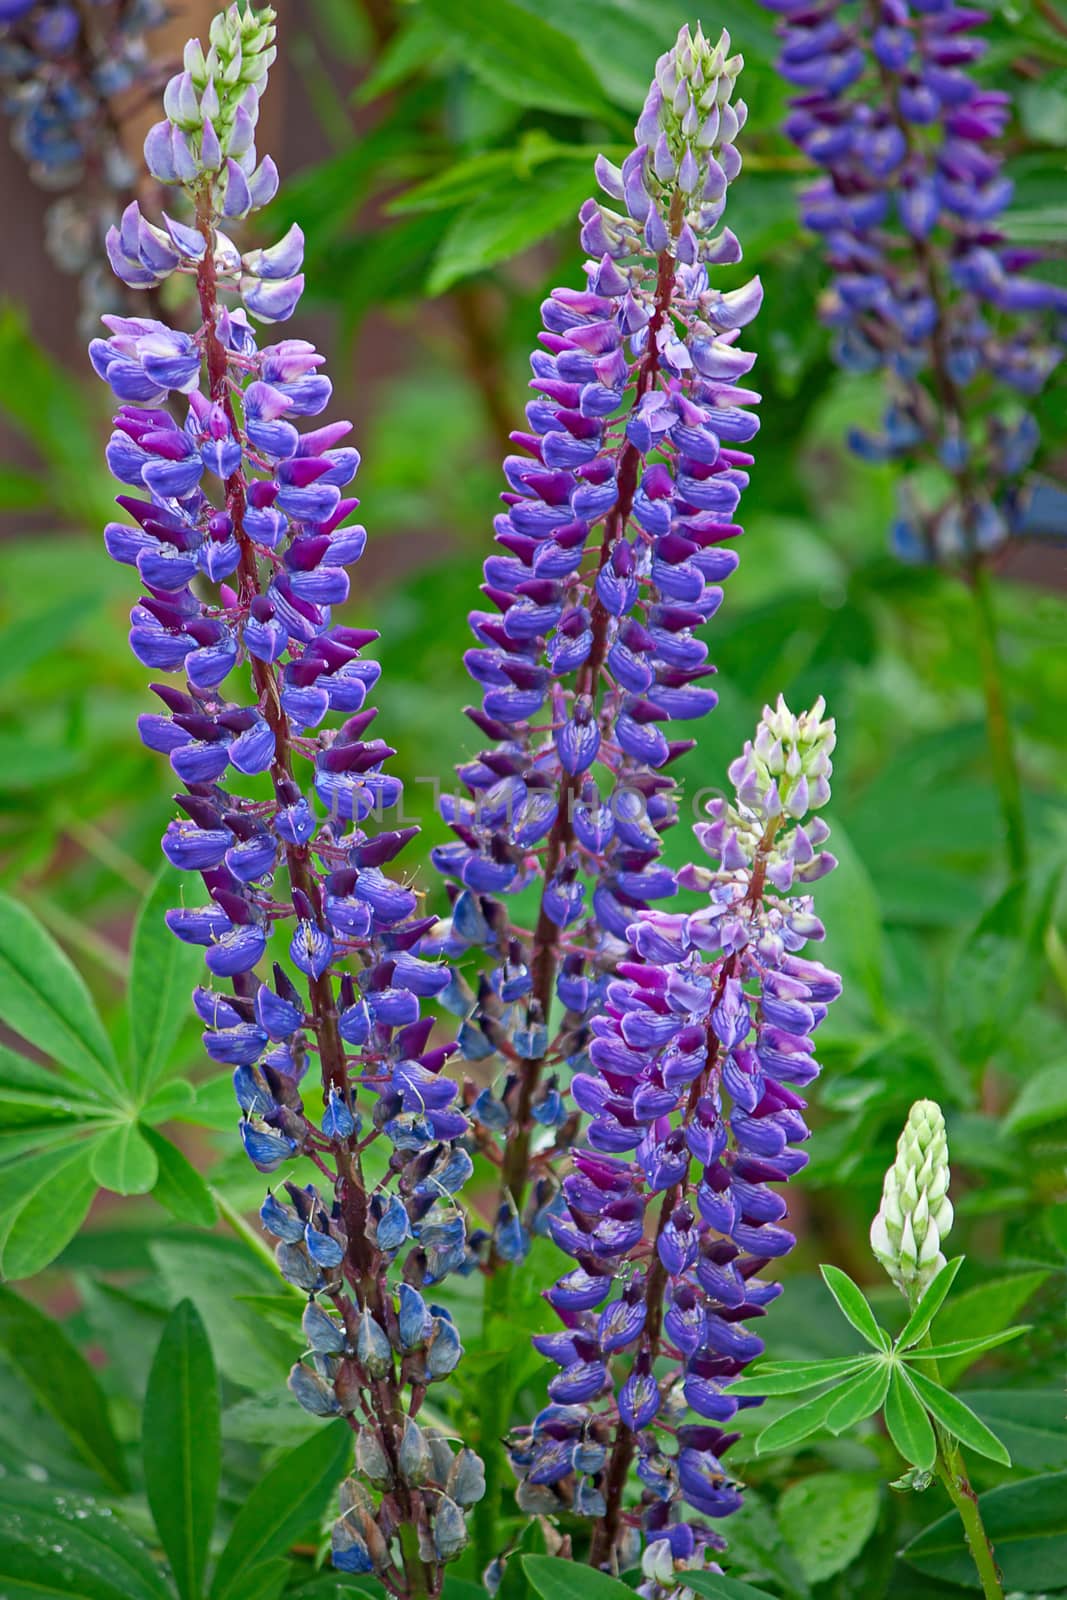 Lupine flowers closeup in a garden on a background of leaves.